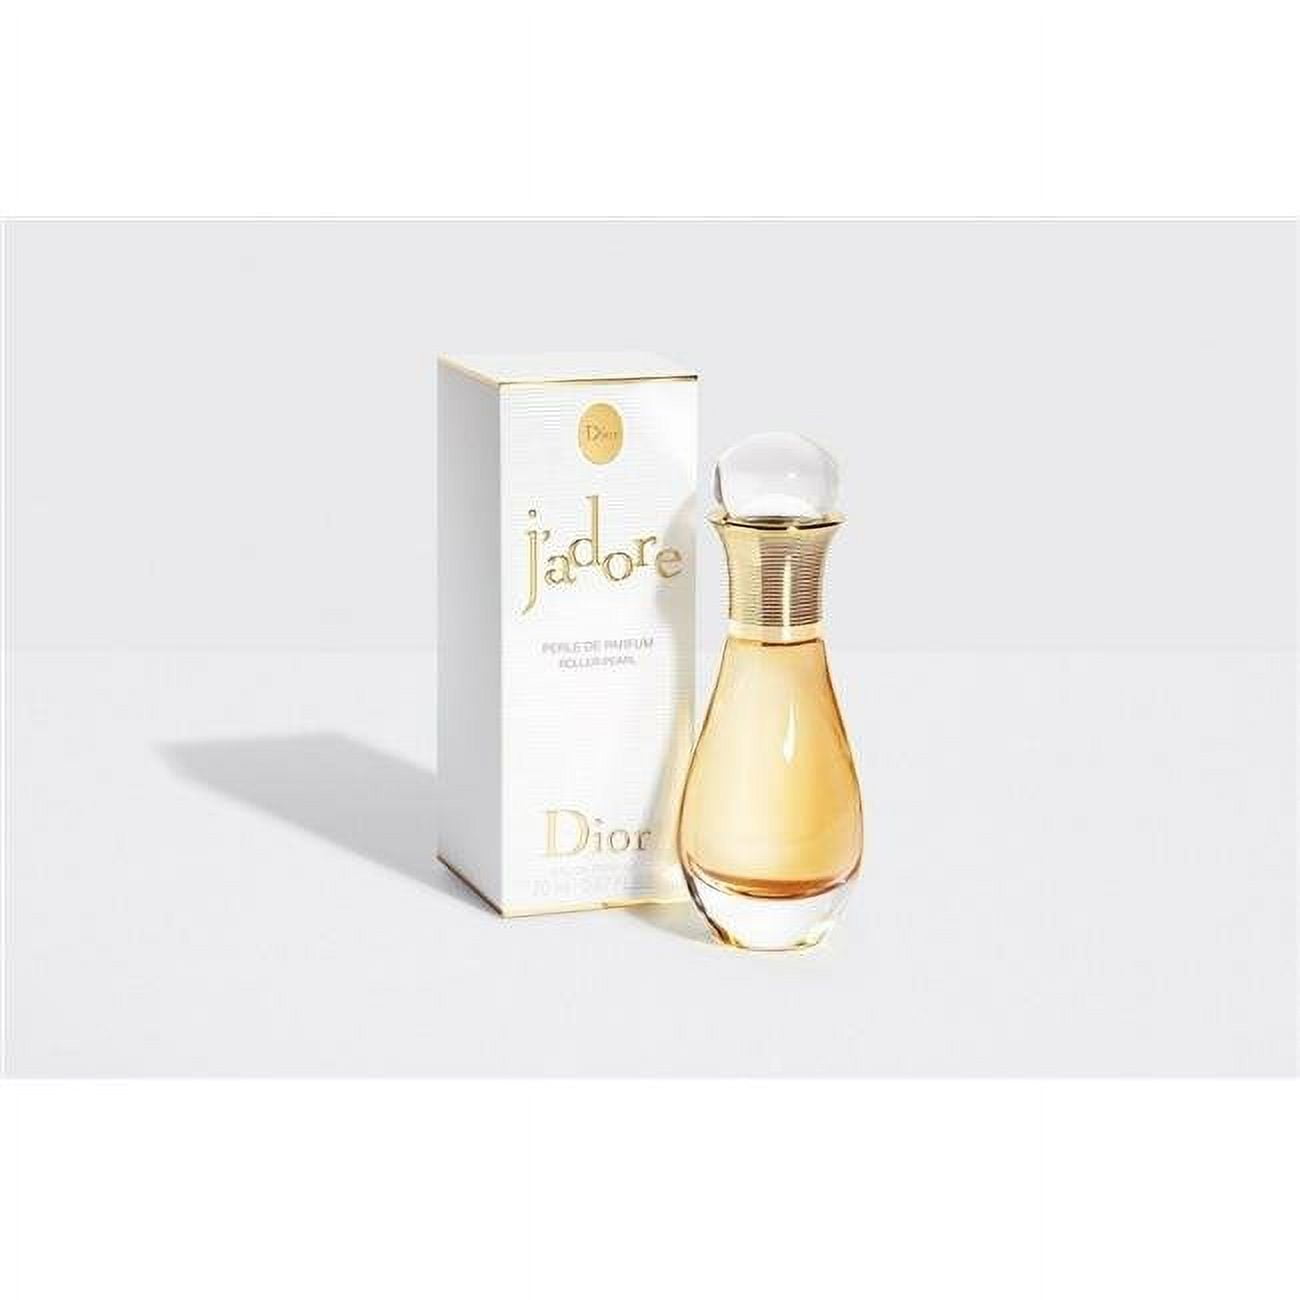 Christian Dior J'Adore Roller-Pearl Eau De Parfum 20ml/0.67oz 20ml/0.67oz  buy in United States with free shipping CosmoStore